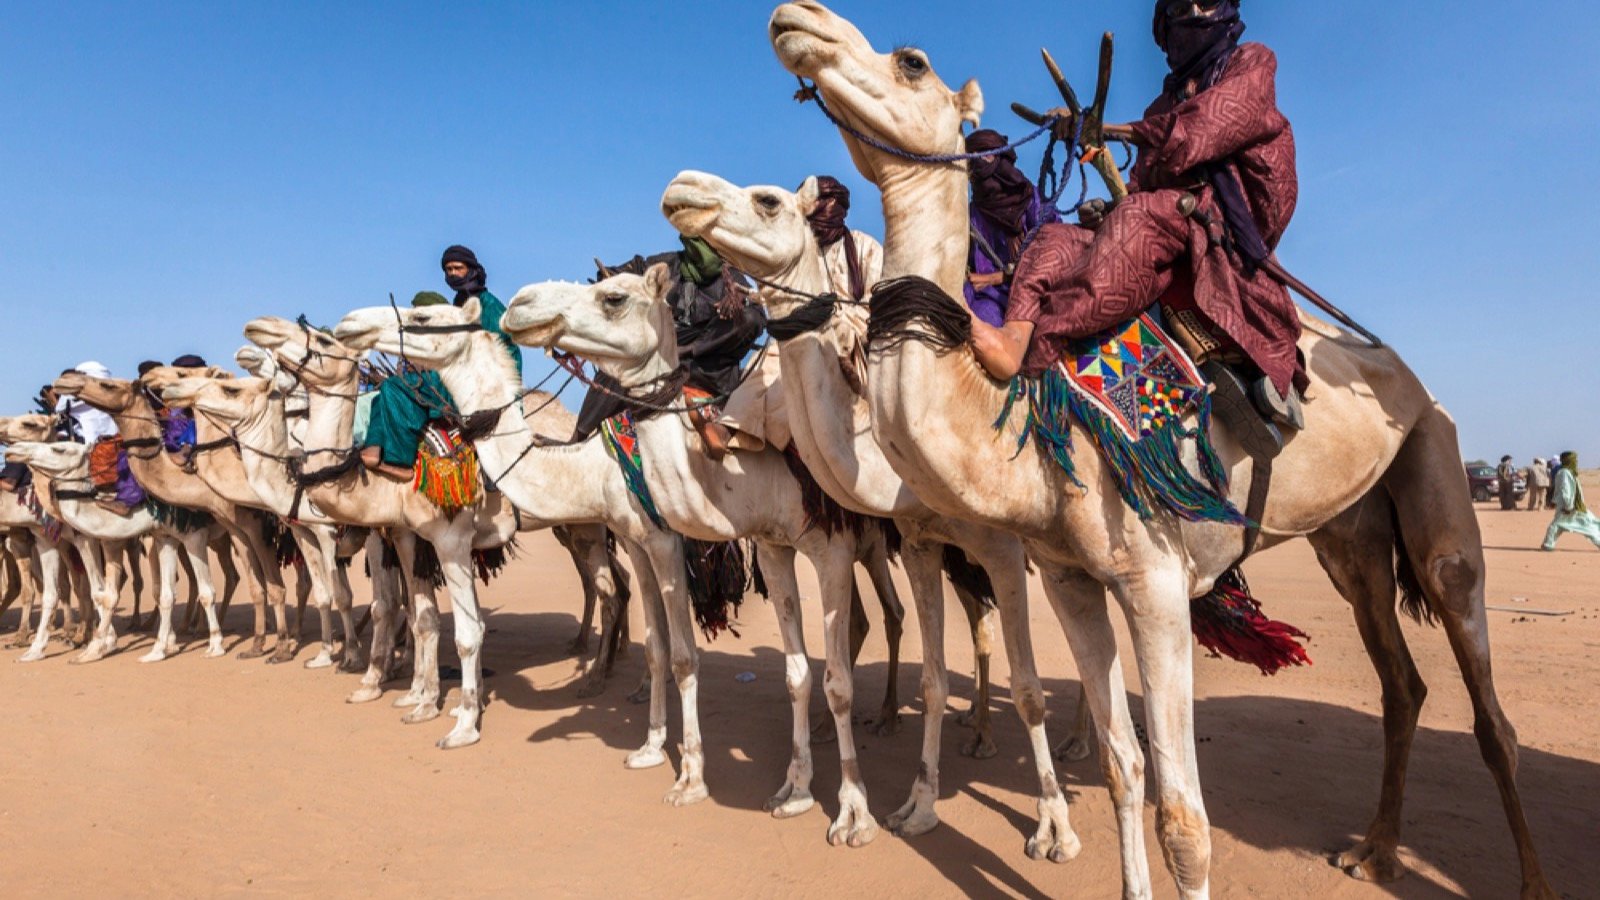 <p>Some of the most prolific musicians and performers come from all over Africa to attend the Festival au Désert in Mali. The Sahara Desert turns into a giant music festival that celebrates the lively dance and music culture of Mali and the Tuareg people’s nomadic culture.</p>